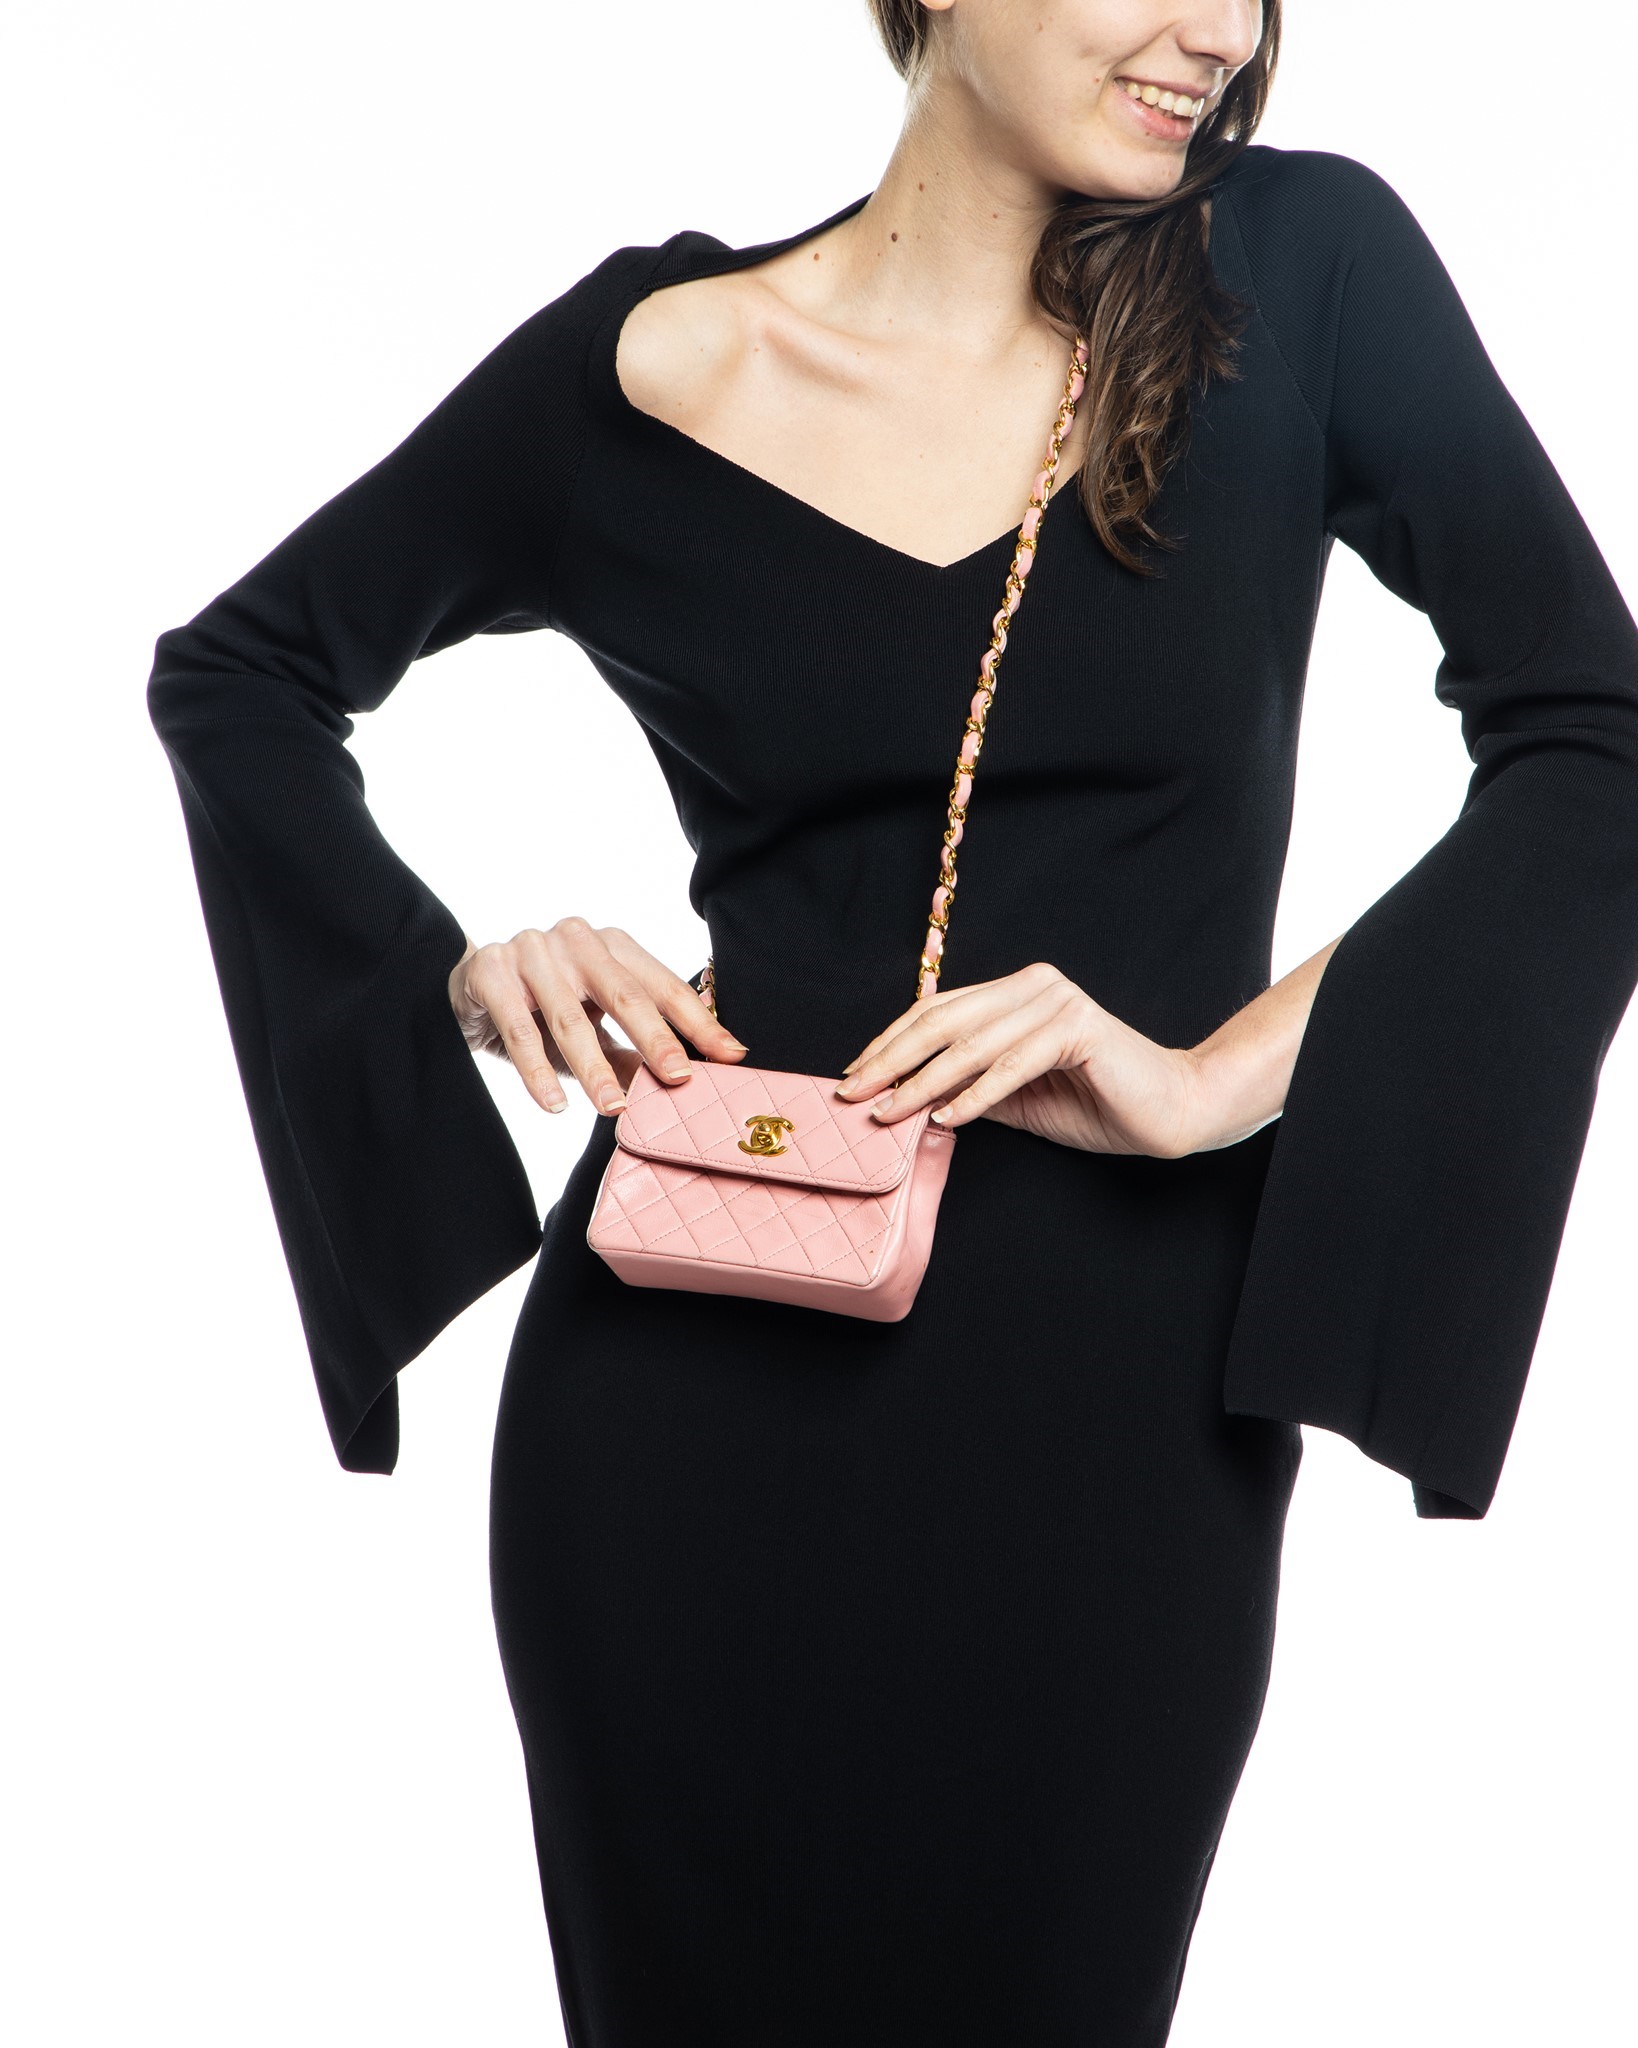 Nass boutique is a multi-brand boutique curating women's clothing and  accessoriesCHANEL PINK QUILTED LEATHER MINI CLASSIC FLAP